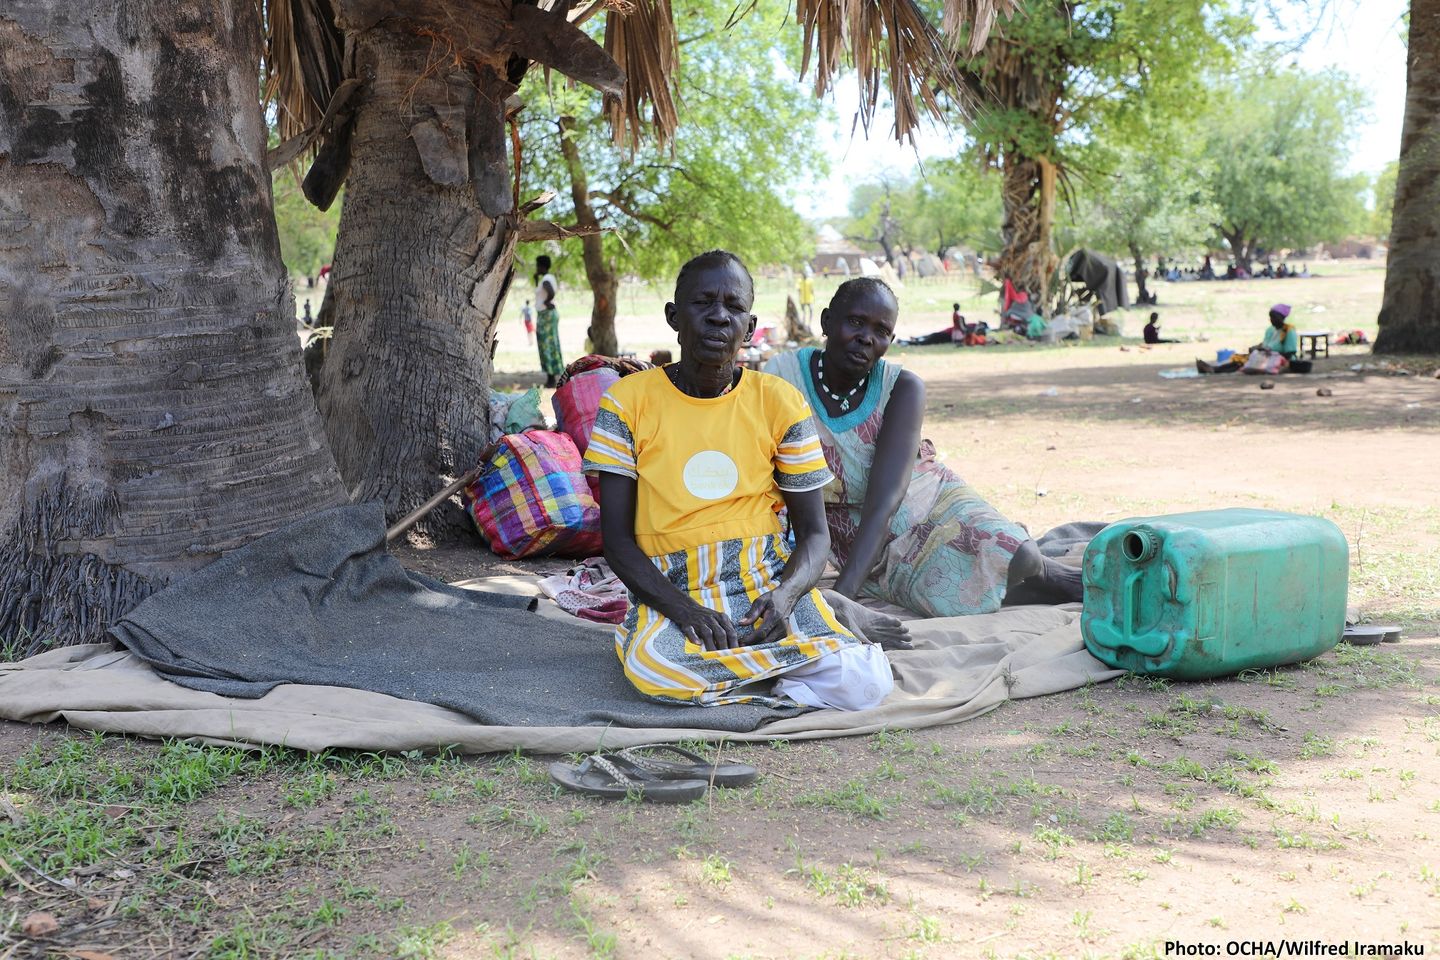 OCHA releases $8 million for civilians displaced by Sudan conflict